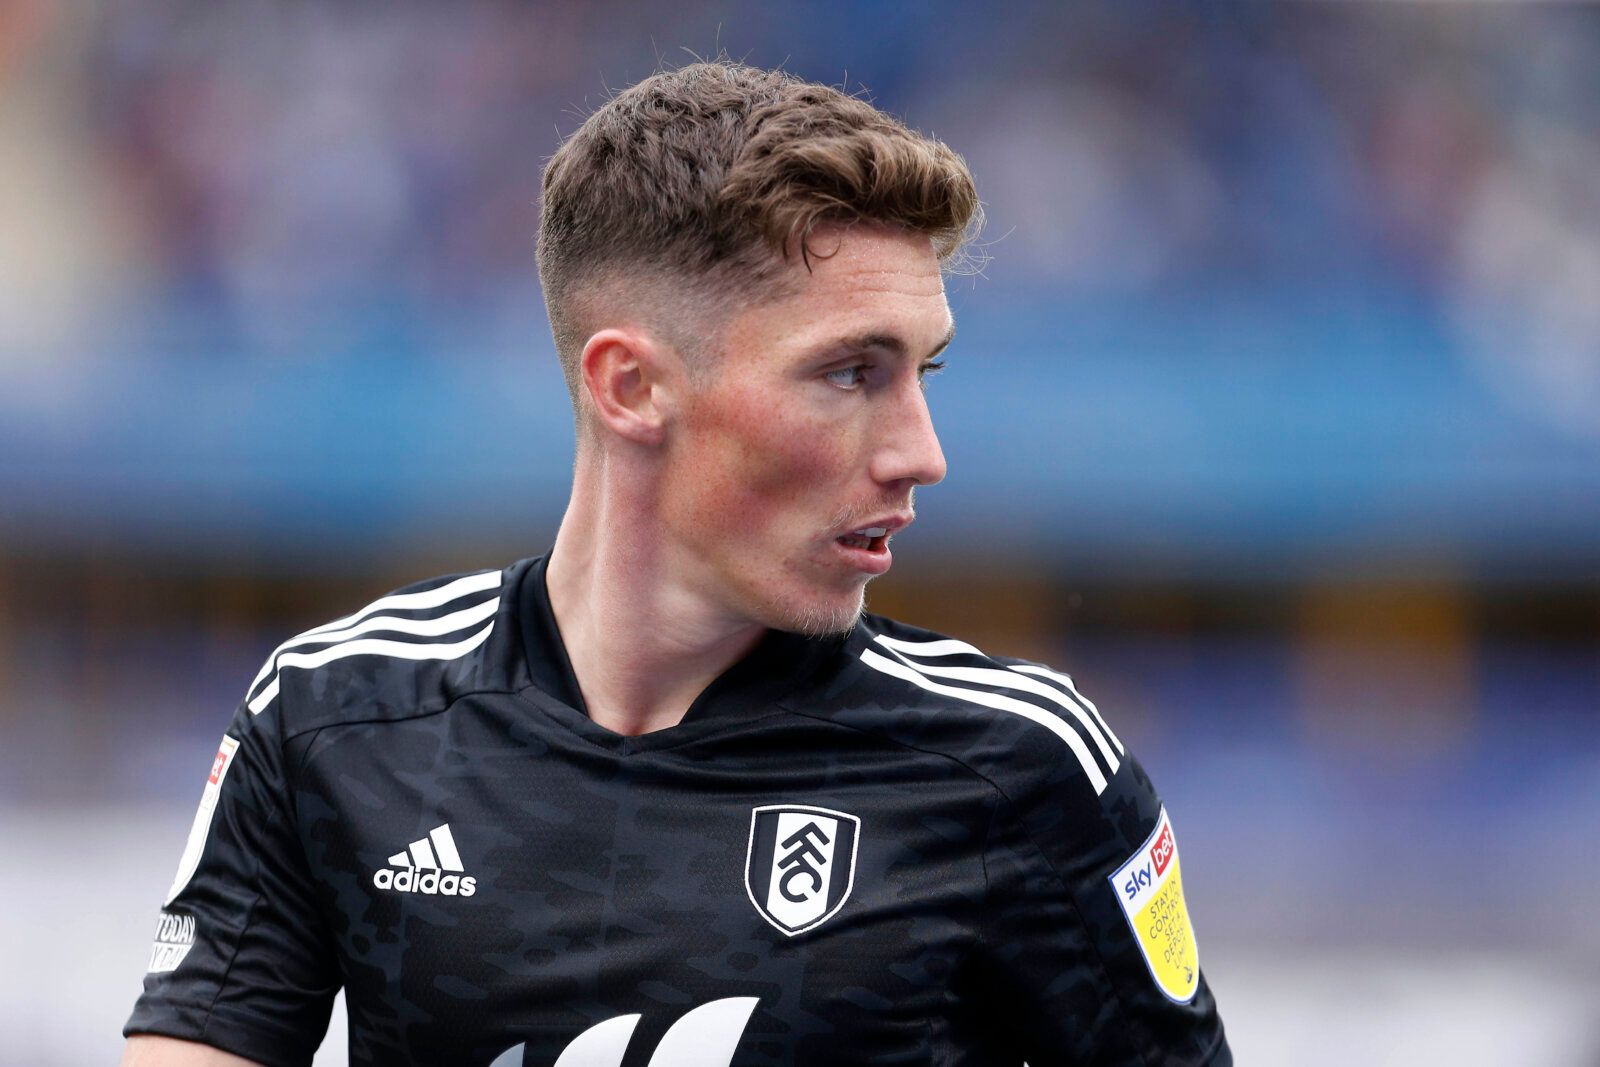 Soccer Football - Championship - Huddersfield Town v Fulham - John Smith's Stadium, Huddersfield, Britain - August 14, 2021 Fulham's Harry Wilson Action Images/Craig Brough EDITORIAL USE ONLY. No use with unauthorized audio, video, data, fixture lists, club/league logos or 'live' services. Online in-match use limited to 75 images, no video emulation. No use in betting, games or single club /league/player publications.  Please contact your account representative for further details.